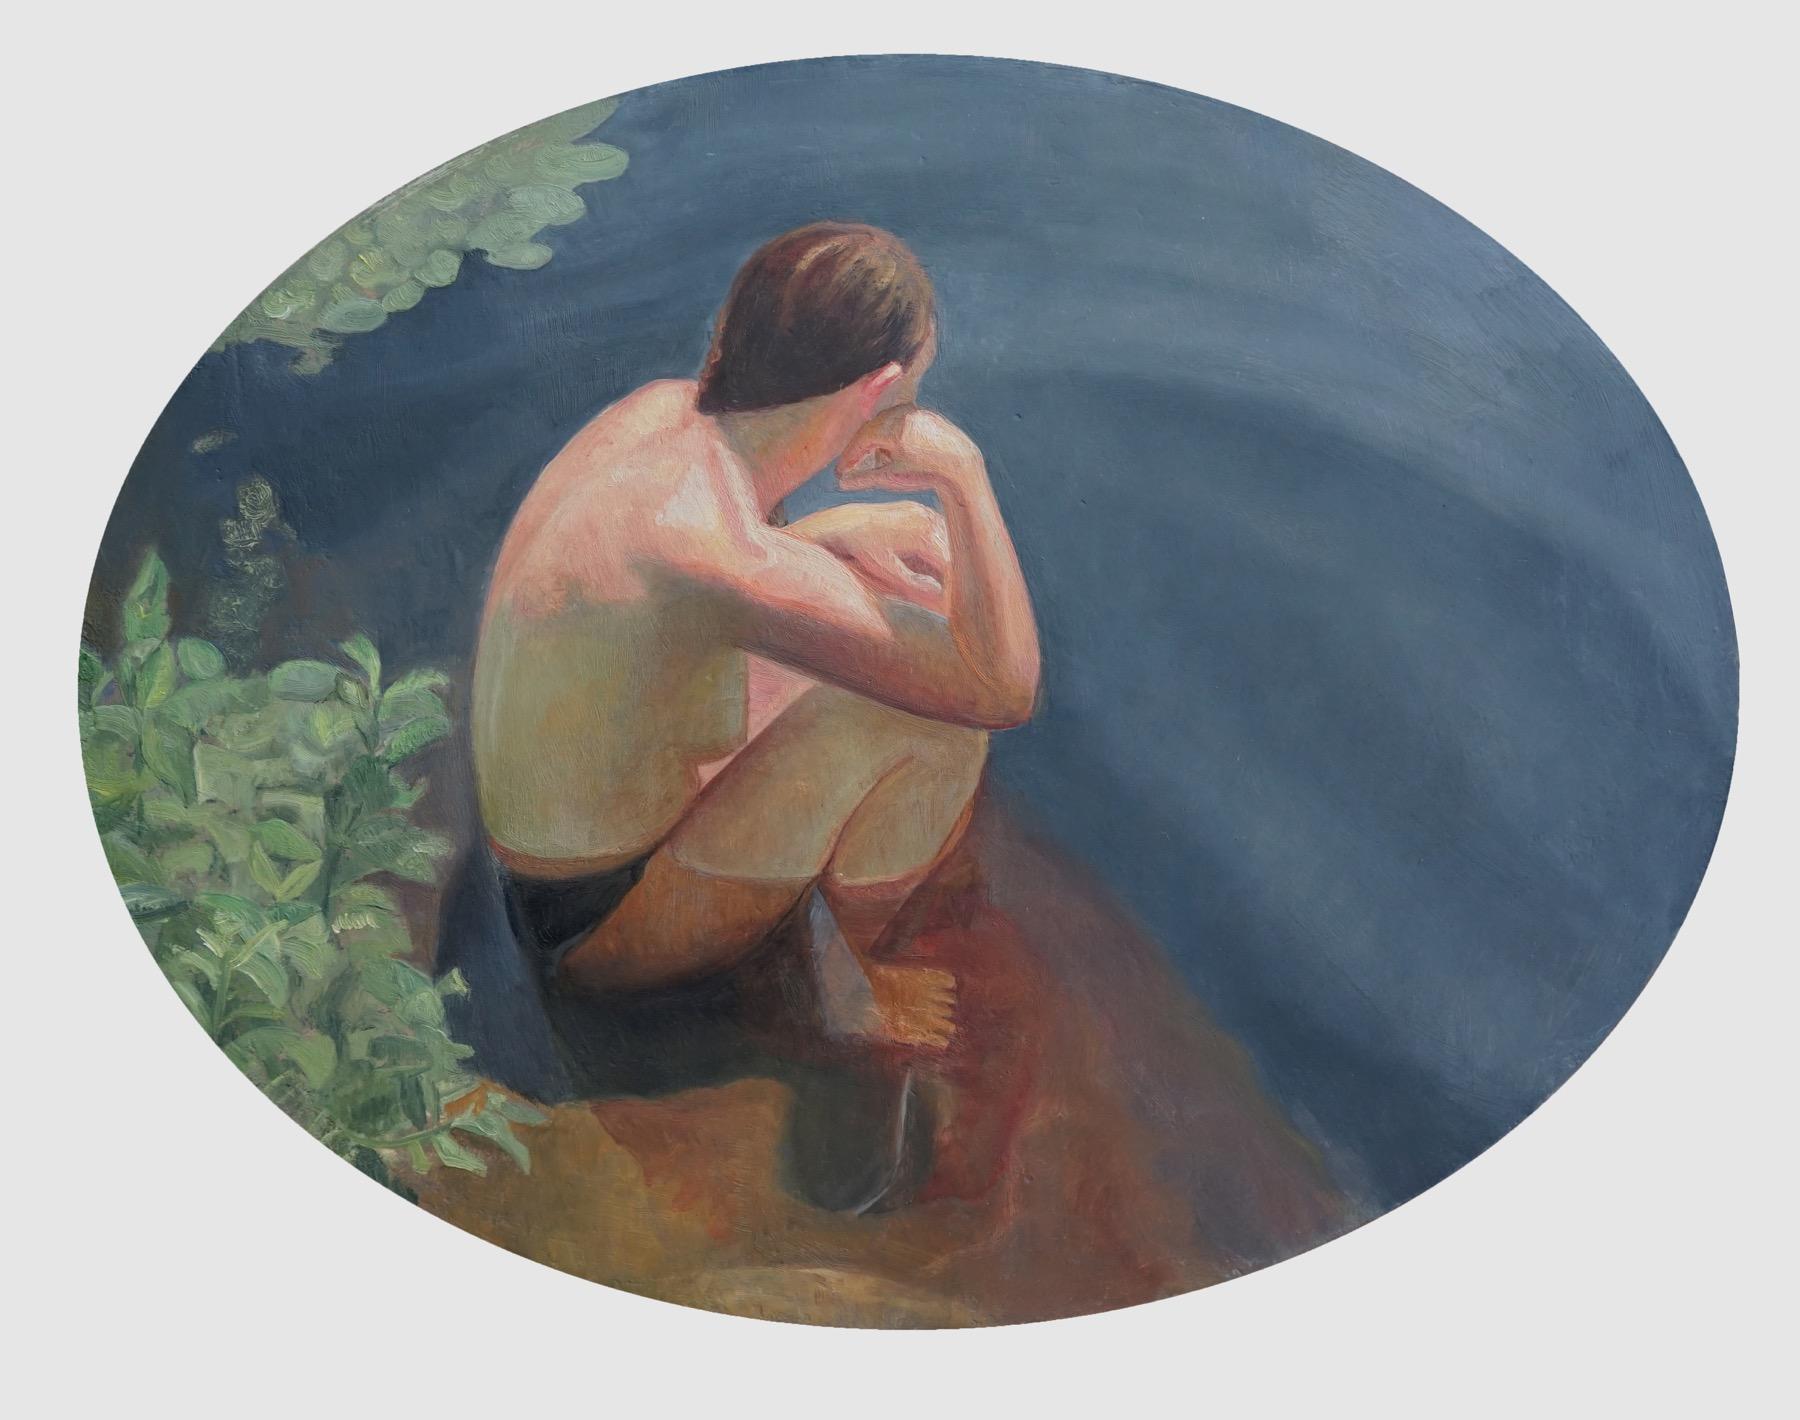 David Molesky Nude Painting - Reading the Ripples - small oval painting